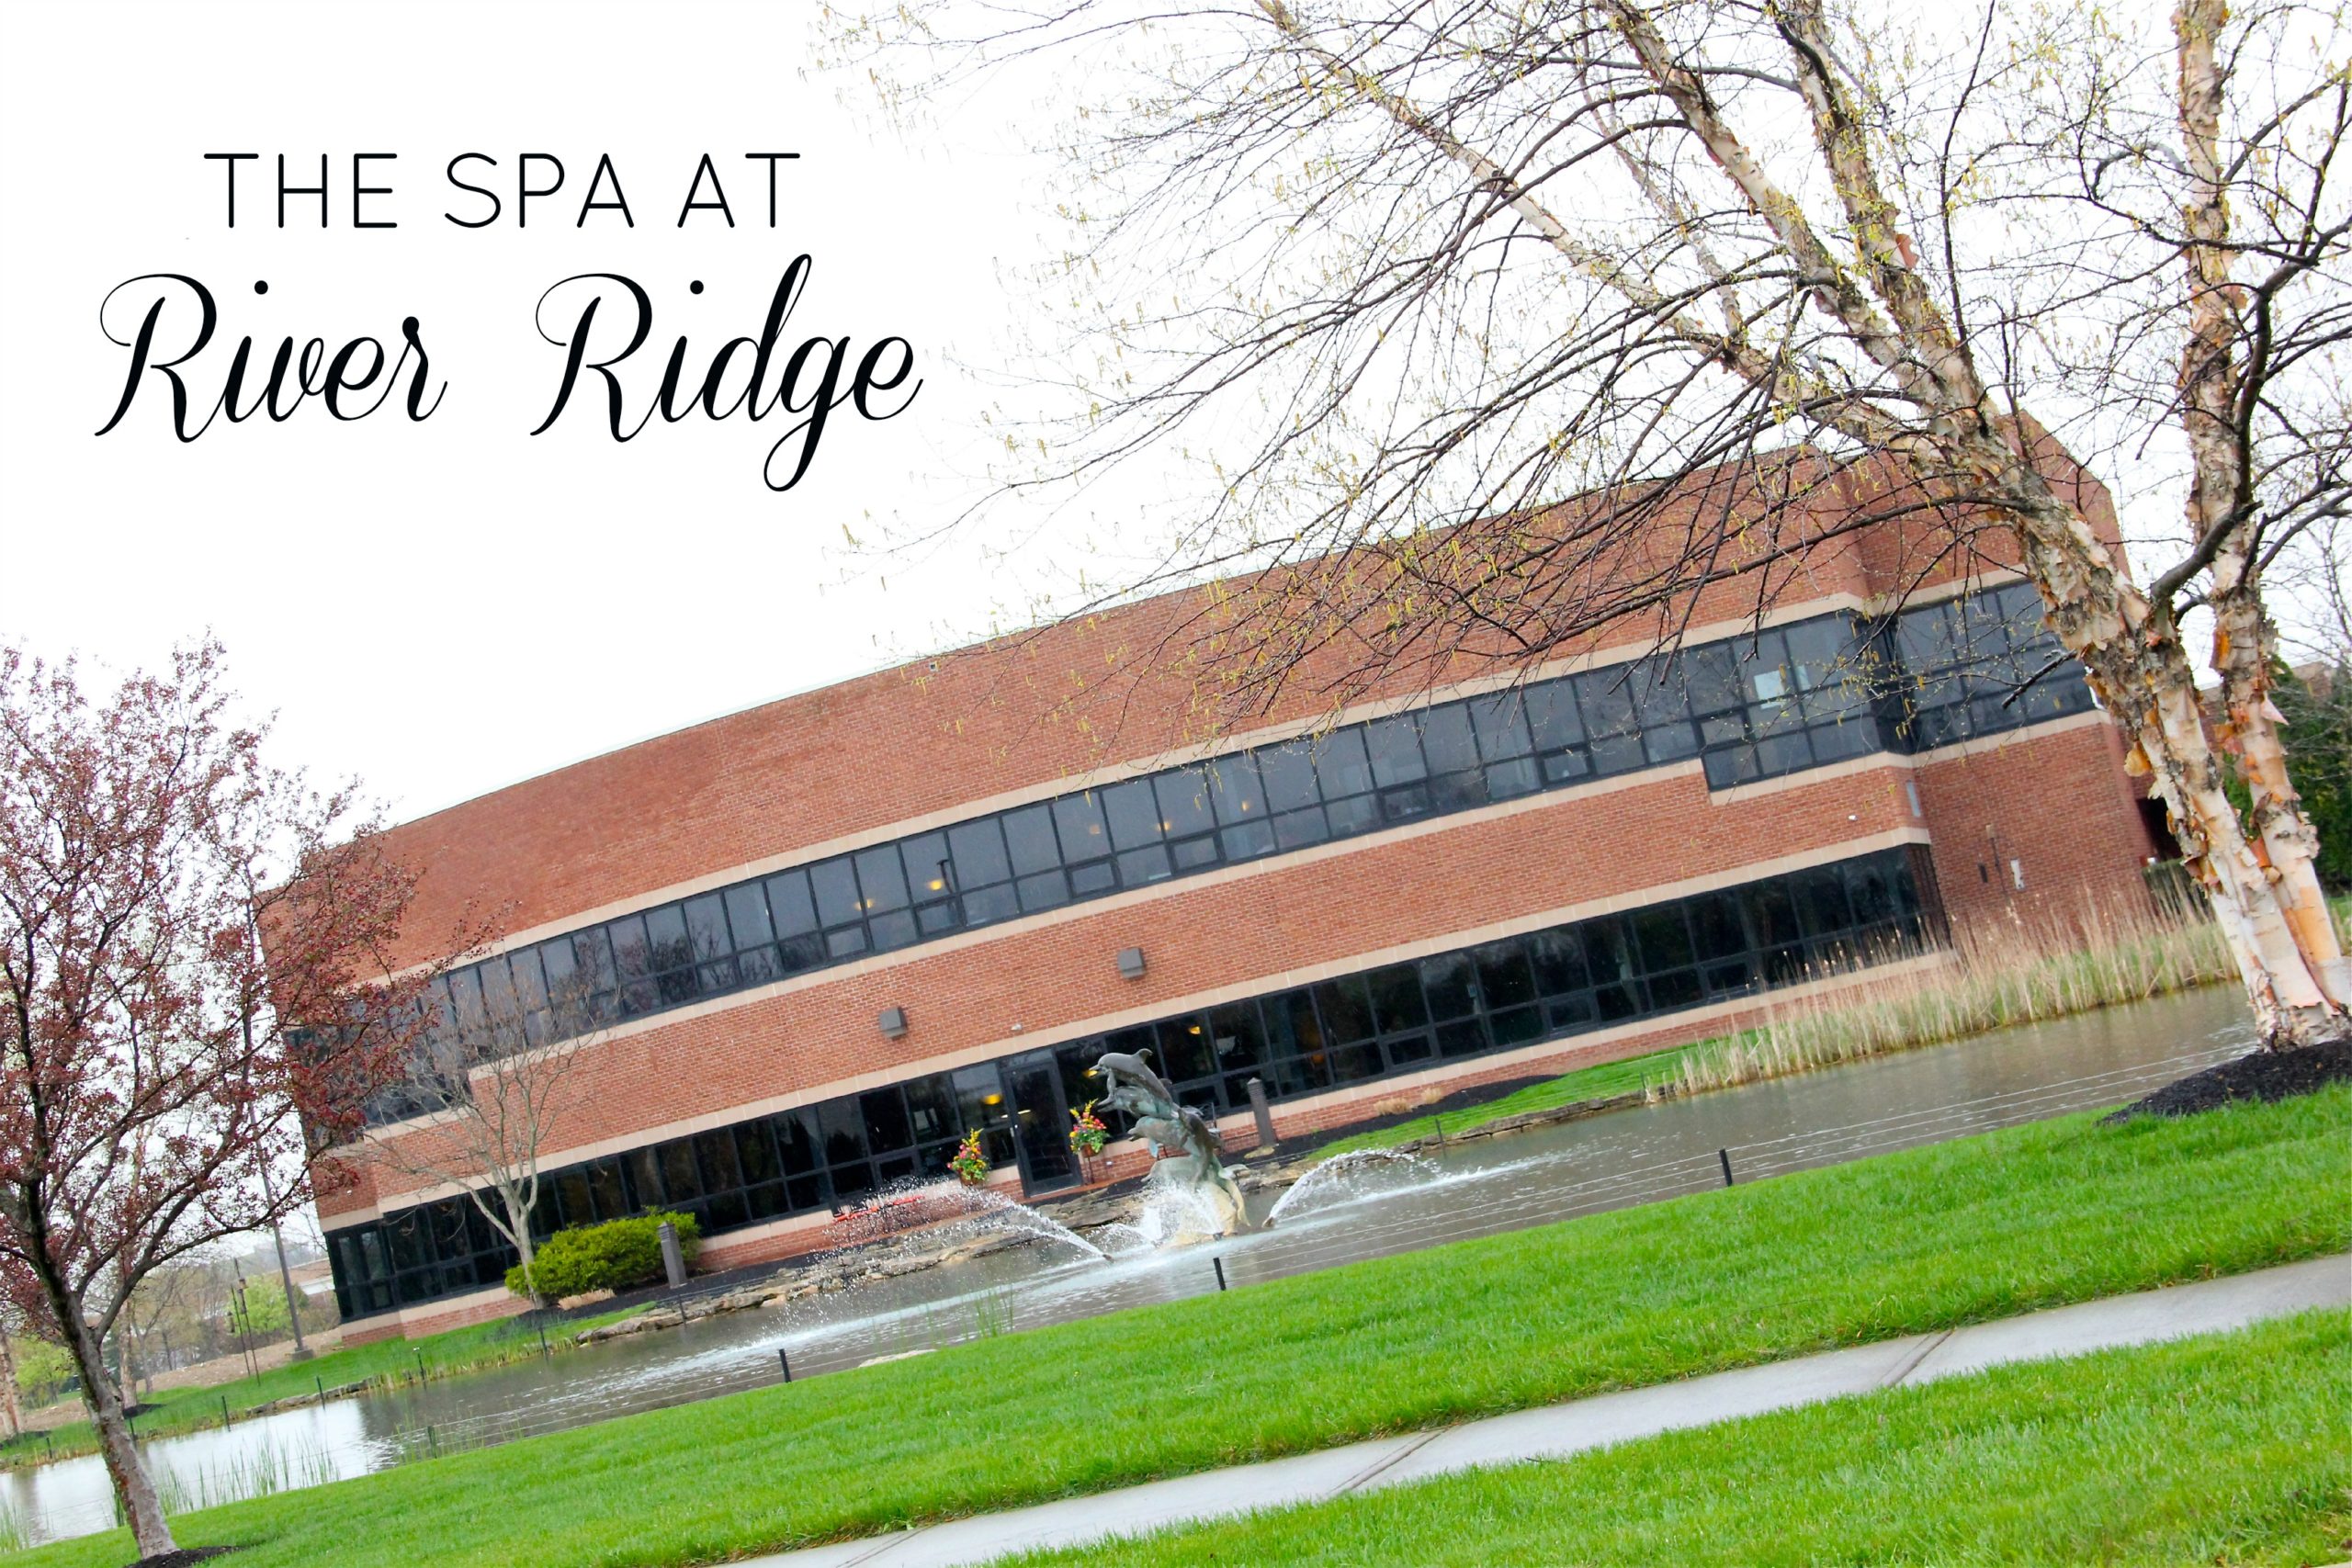 The Best Spa Day Ever: The Spa at River Ridge